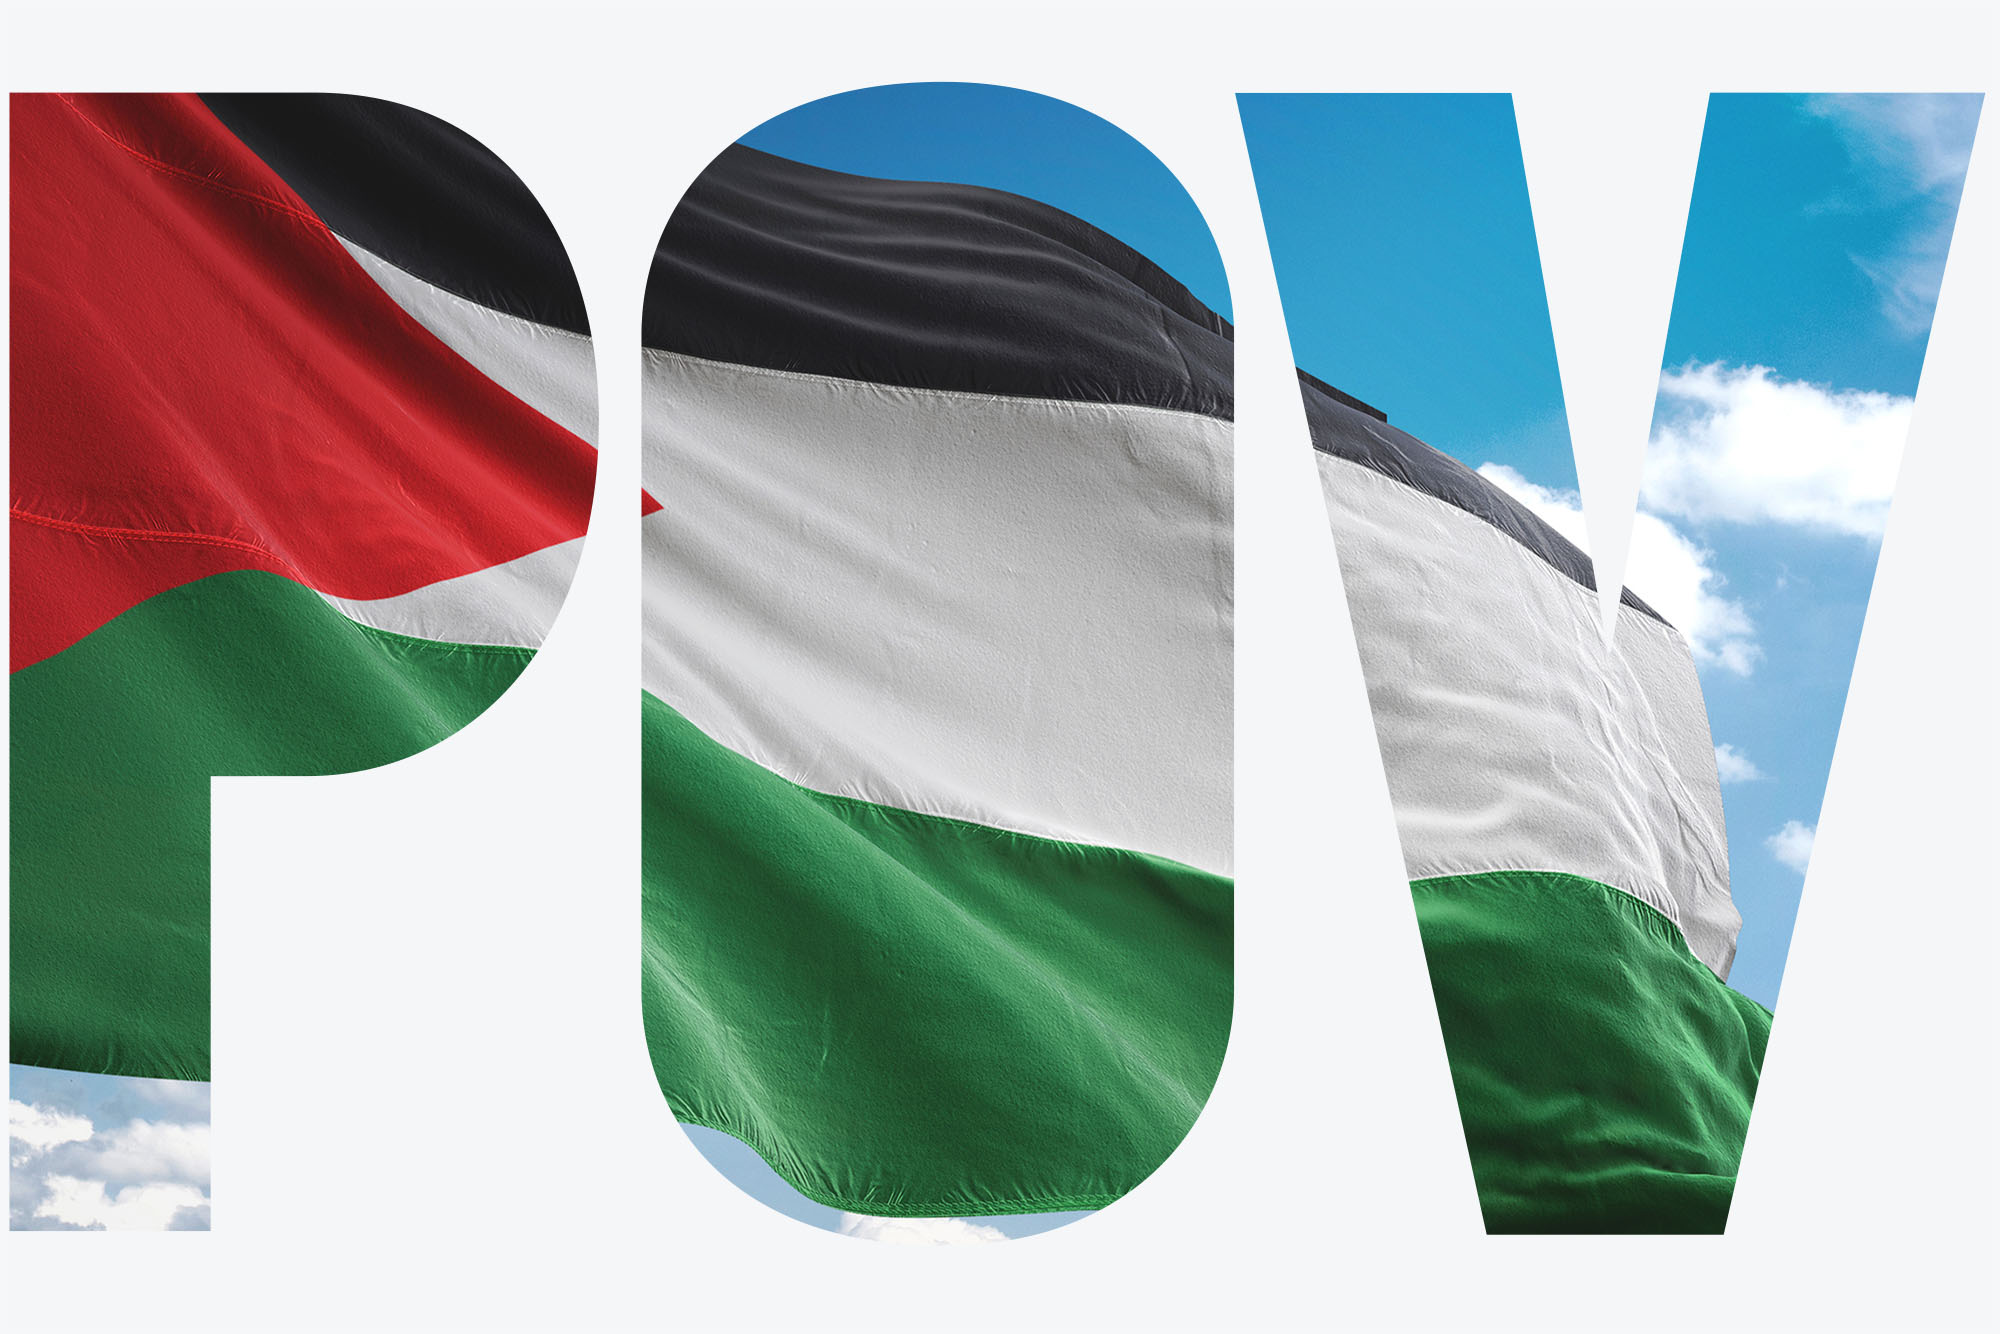 Photo: A Palestinian flag is shown waving across a blue sky. A few stray clouds can be seen in the sky. Image is seen through transparent letters that read "POV" on a white overlay.